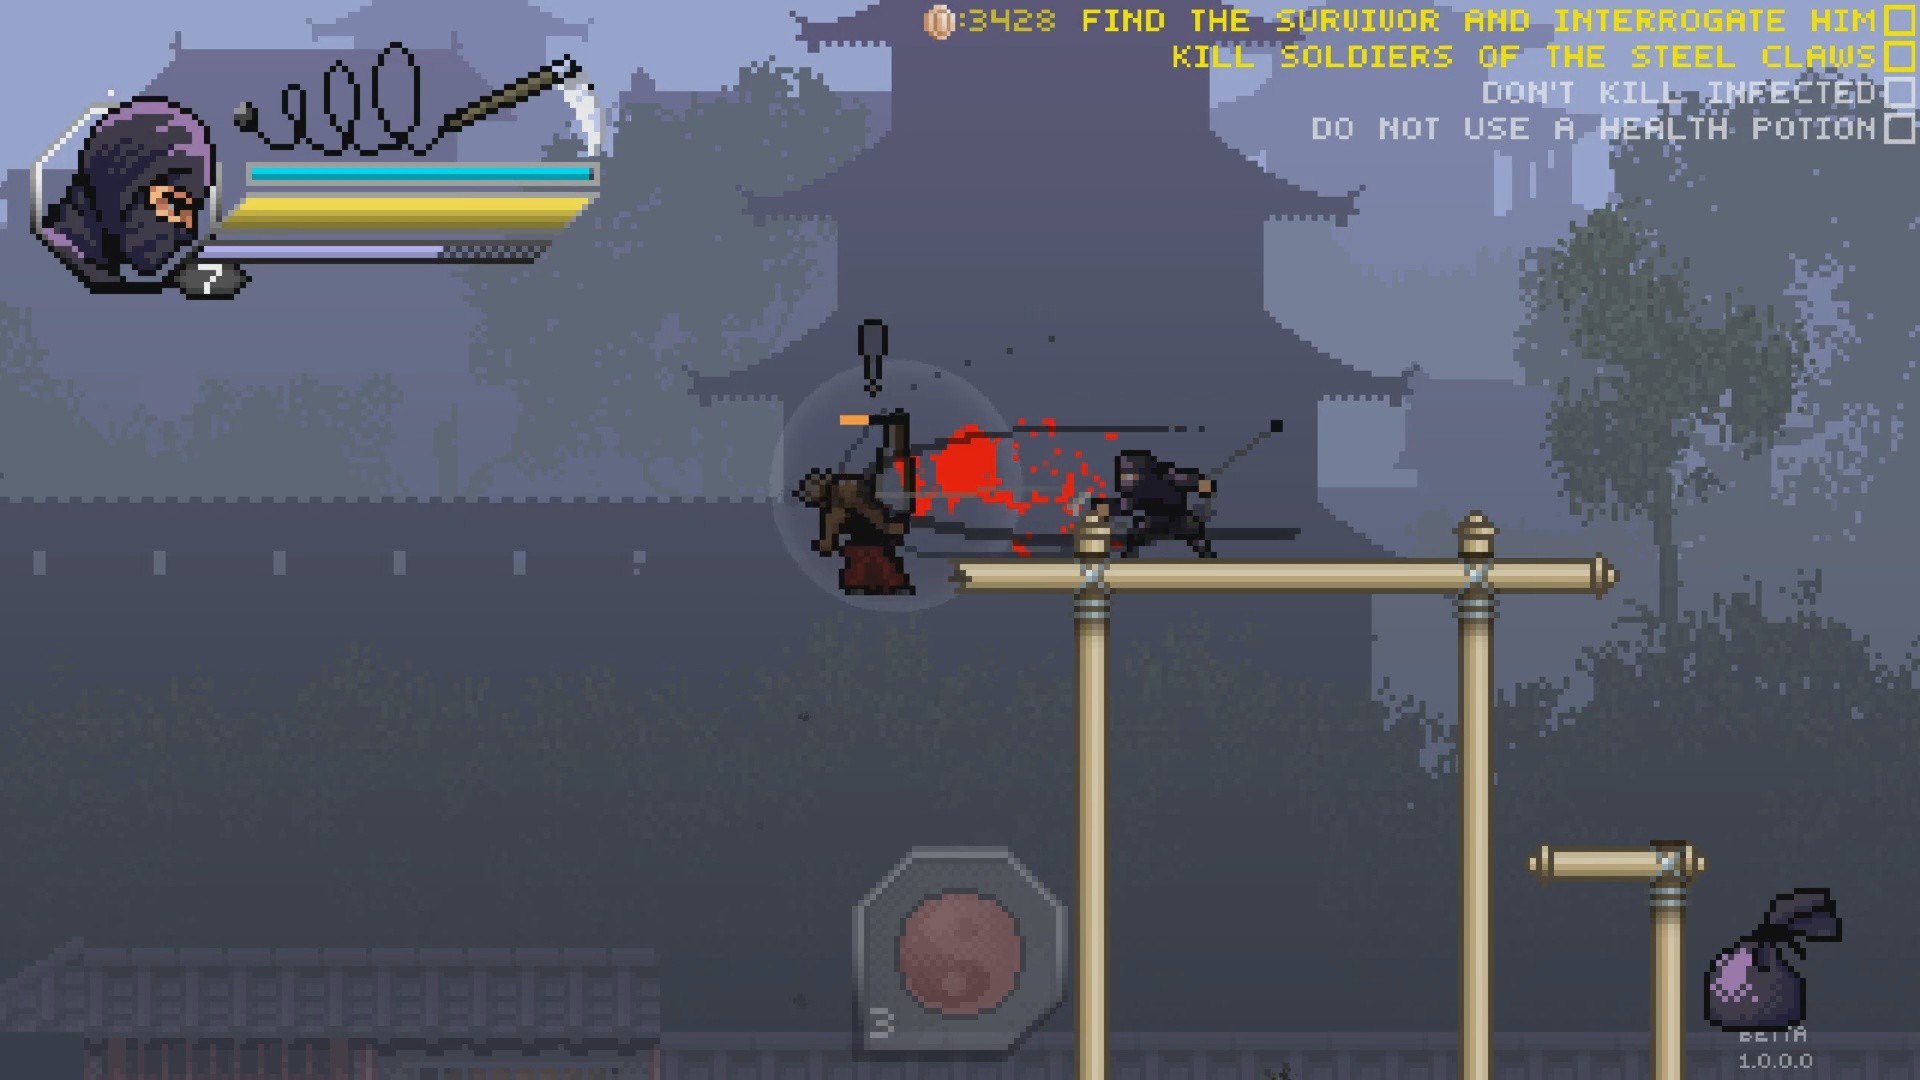 Within the blade screenshot